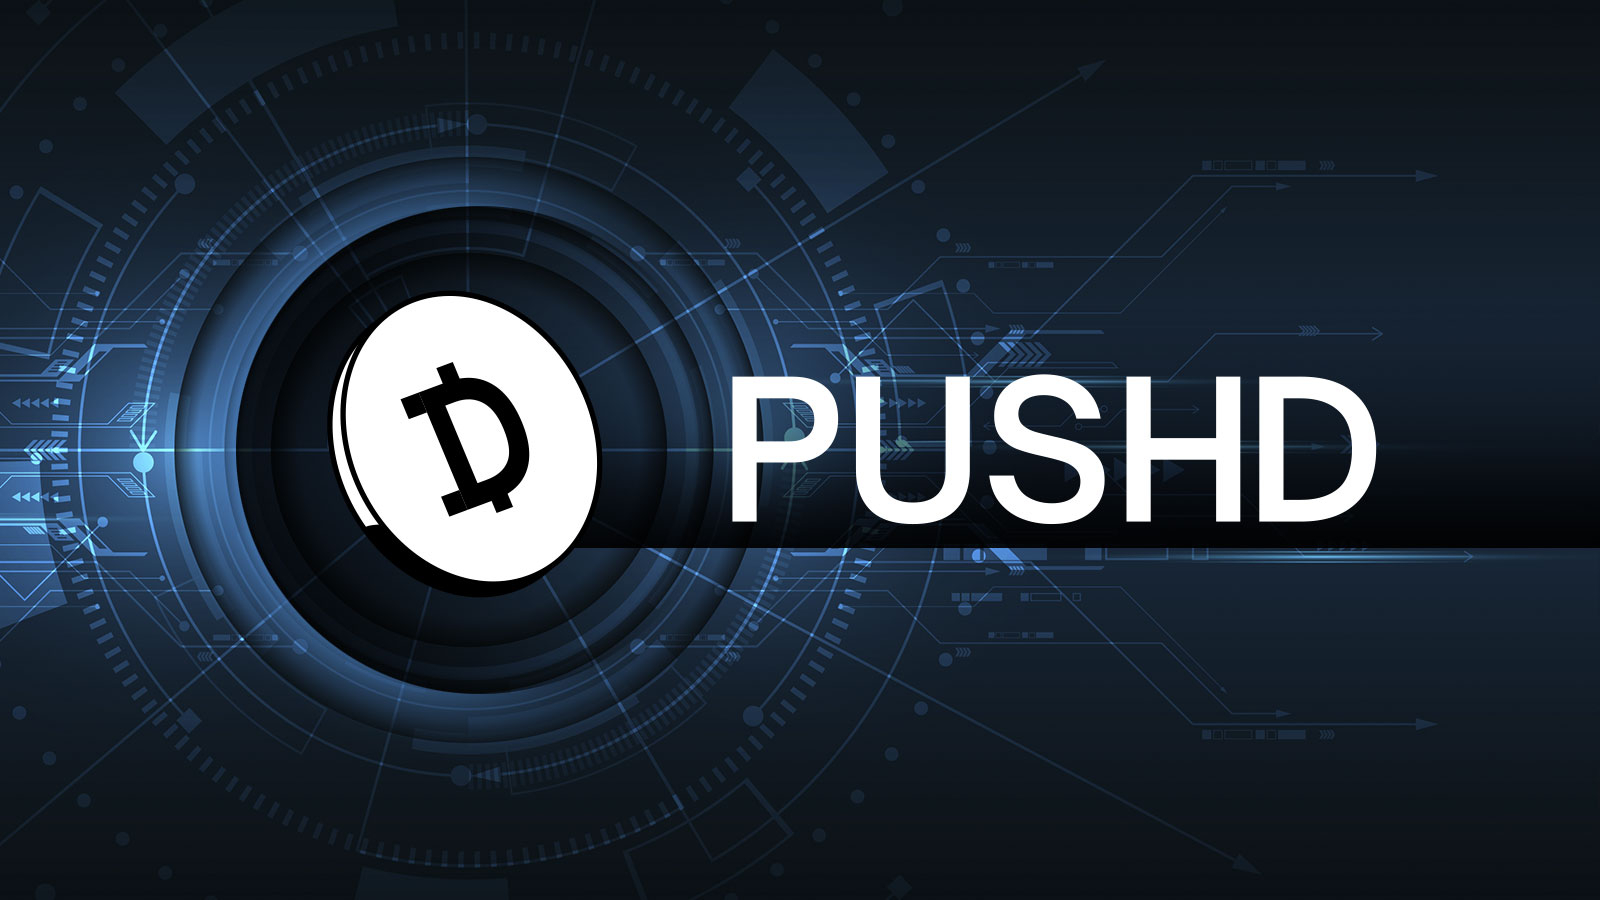 Pushd (PUSHD) Preliminary Token Sale Might be in Spotlight during April as Avalanche (AVAX) and Maker (MKR) Top Altcoins Recovering